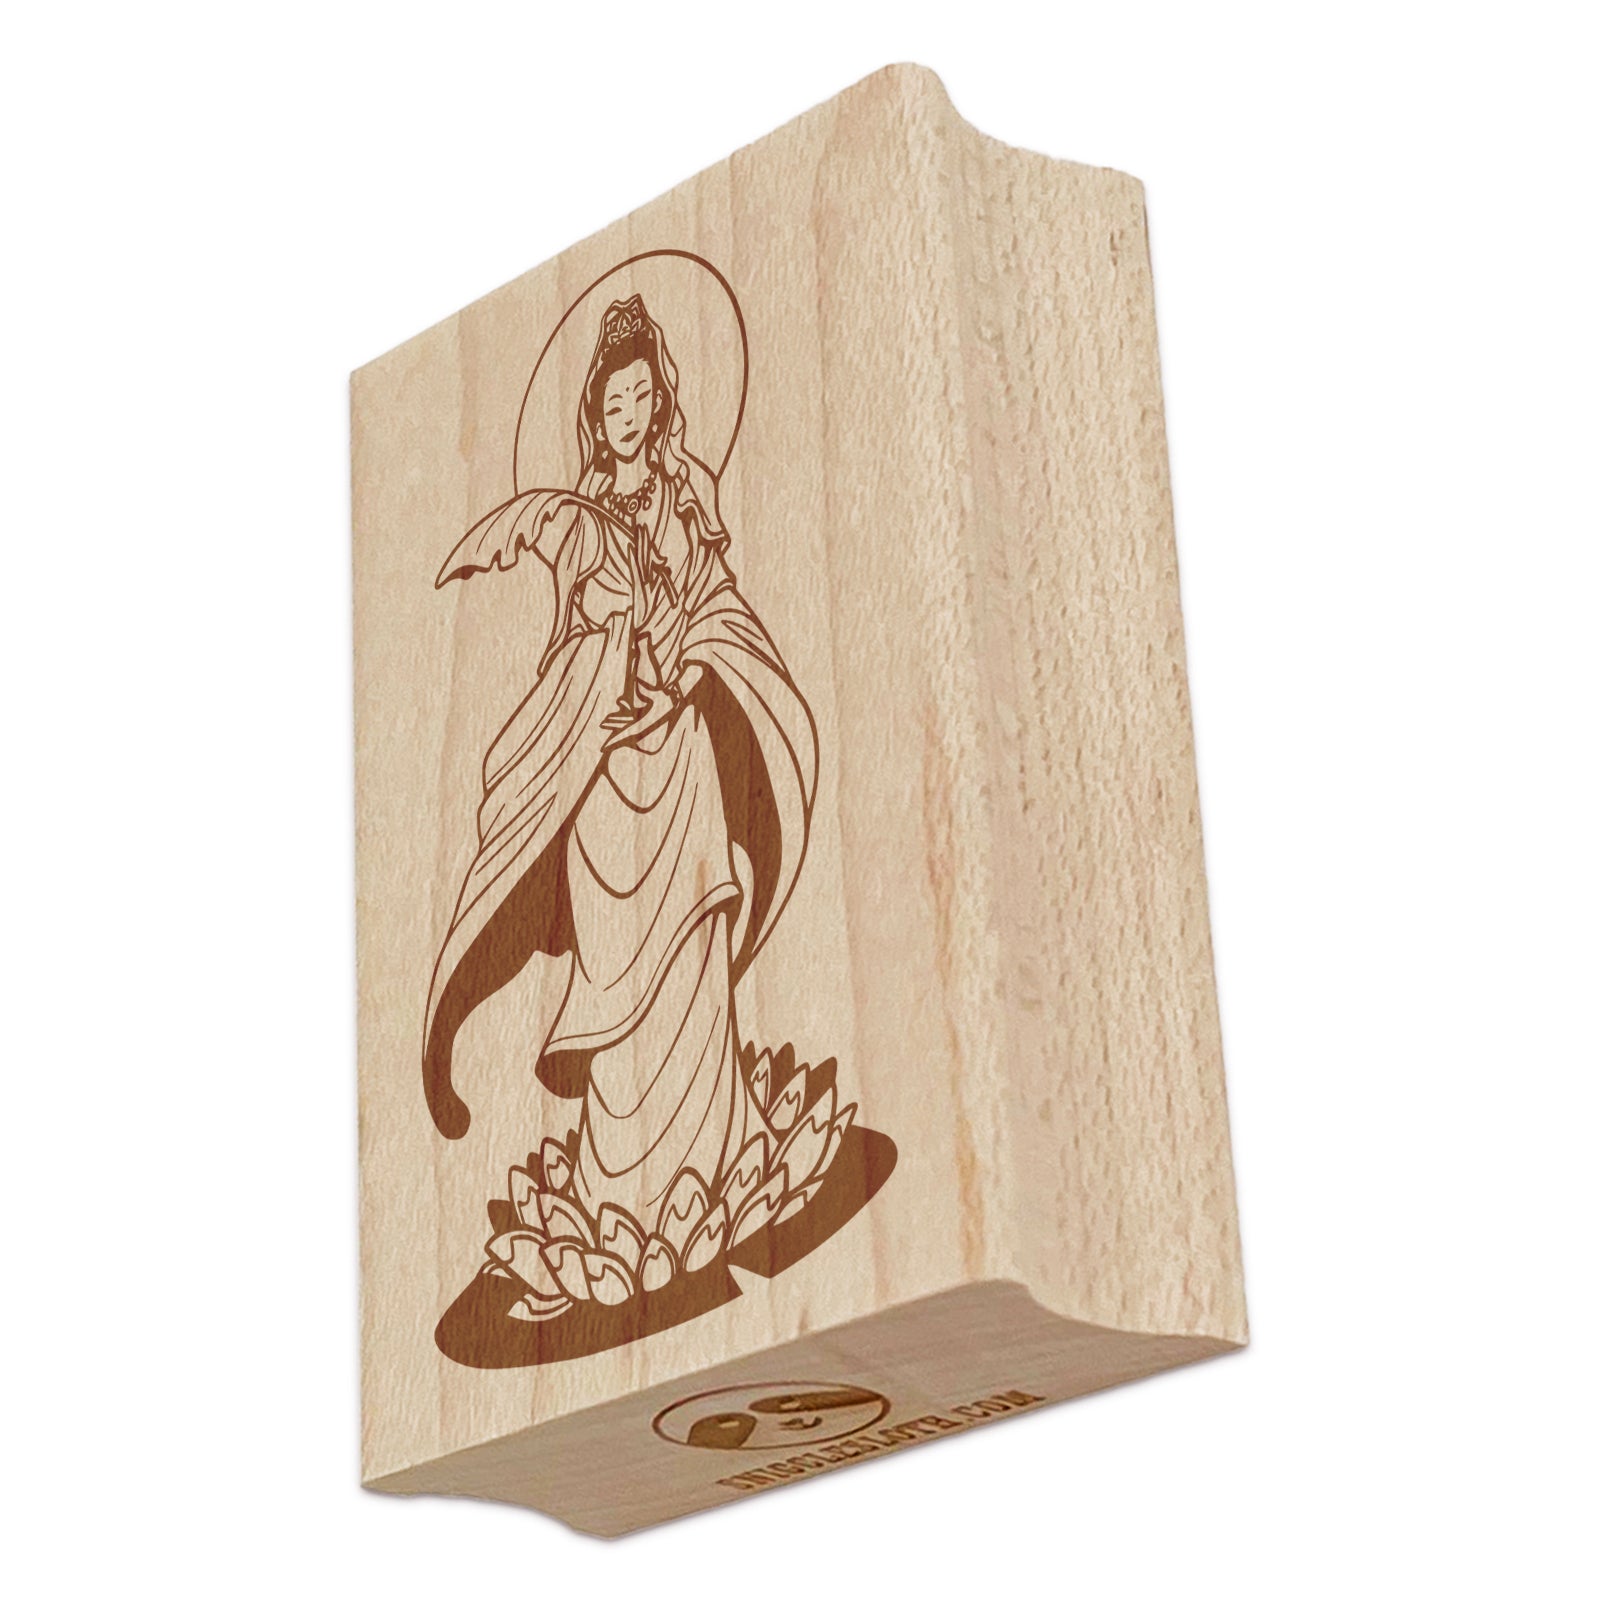 The High Priestess Tarot Card Rubber Stamp for Stamping Crafting Planners